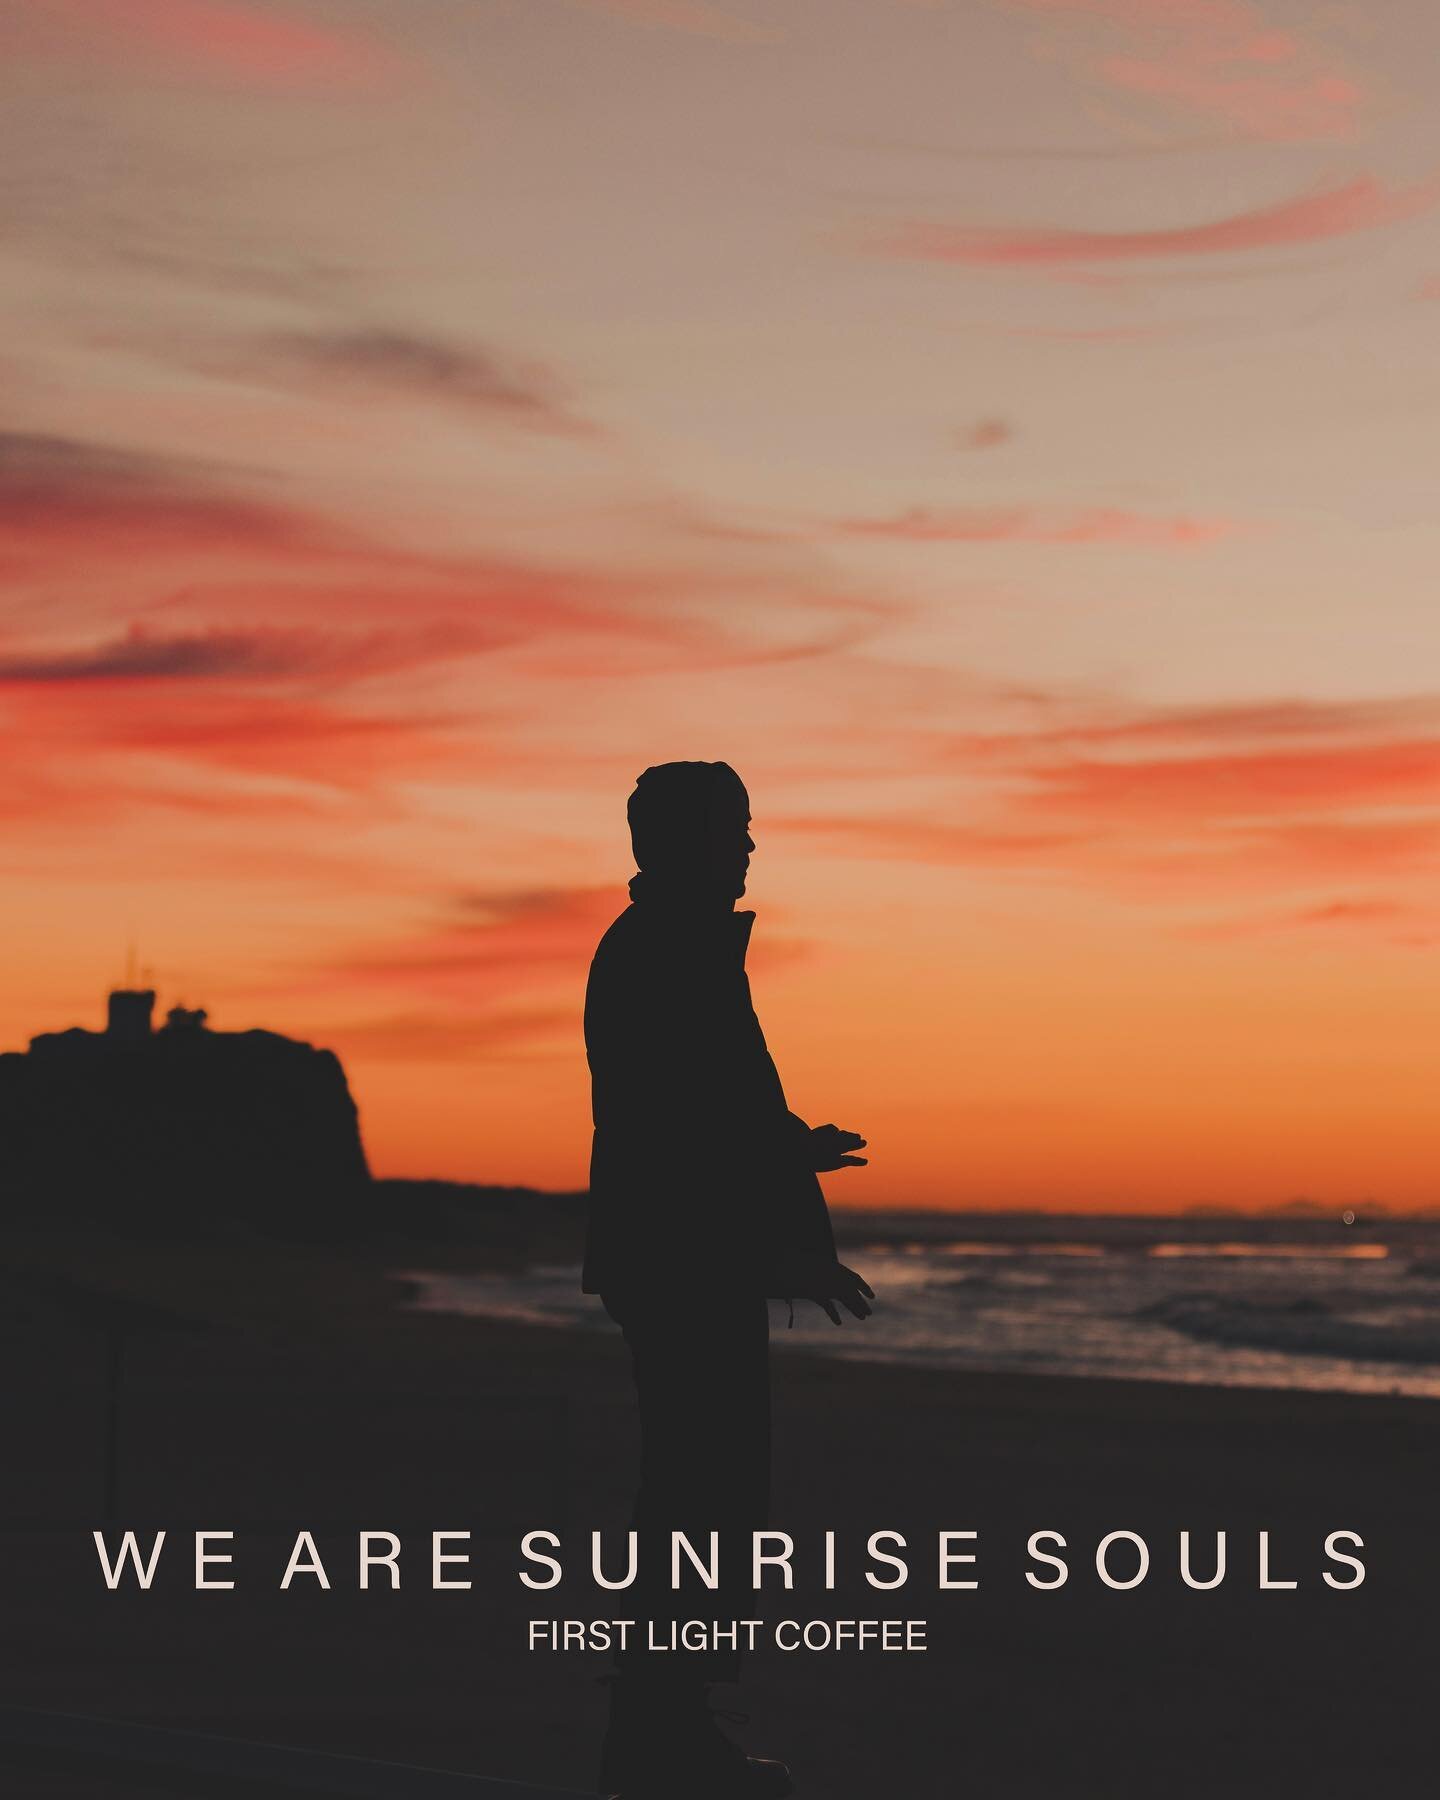 We are sunrise souls, igniting each day with passion and purpose (and coffee). 

www.firstlightcoffee.co.uk

*
*
*
*
*
*
*
*
#coffeetime #indiecoffee #coffee #outdoors #explorer #adventure #sunrise #sunriseclub #sun #firstlight #mountains #wales #wel